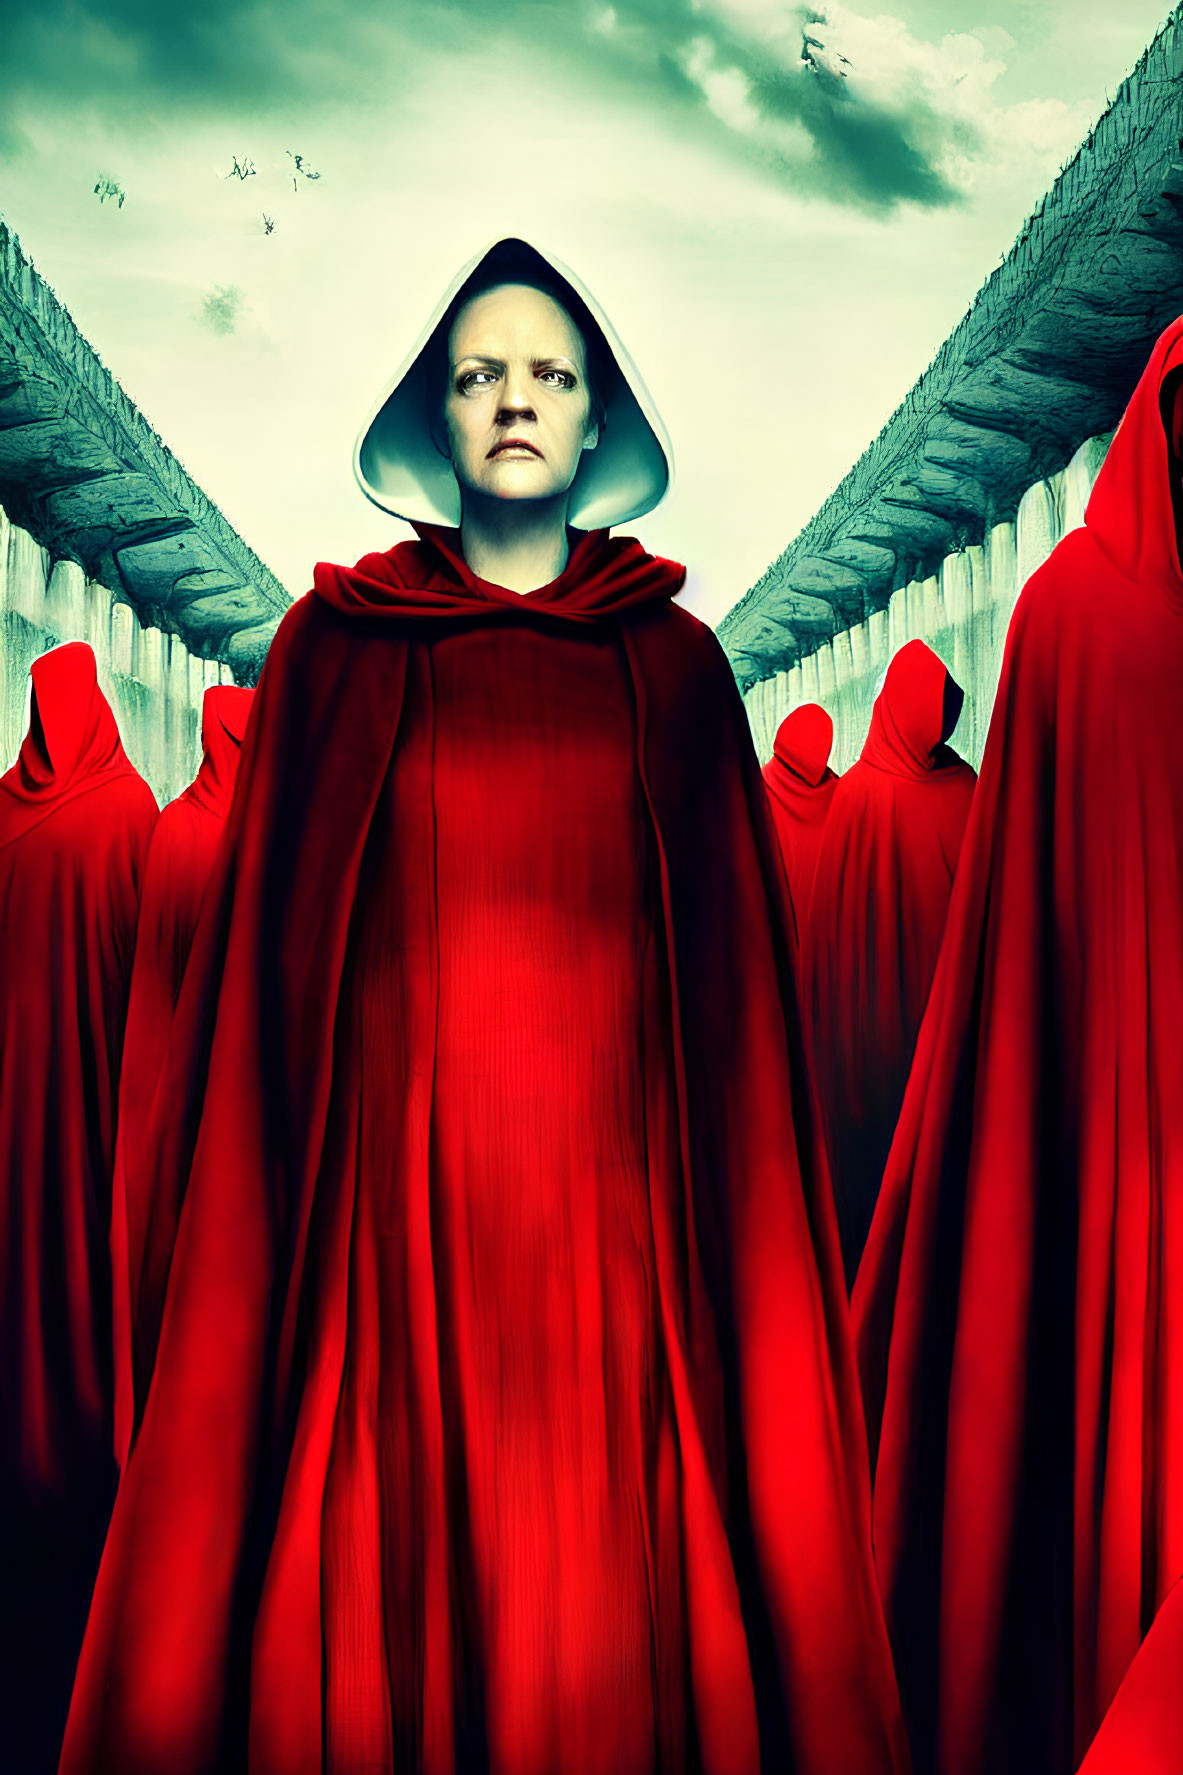 Symmetrical Formation of Figures in Red Cloak and Bonnet under Dramatic Sky